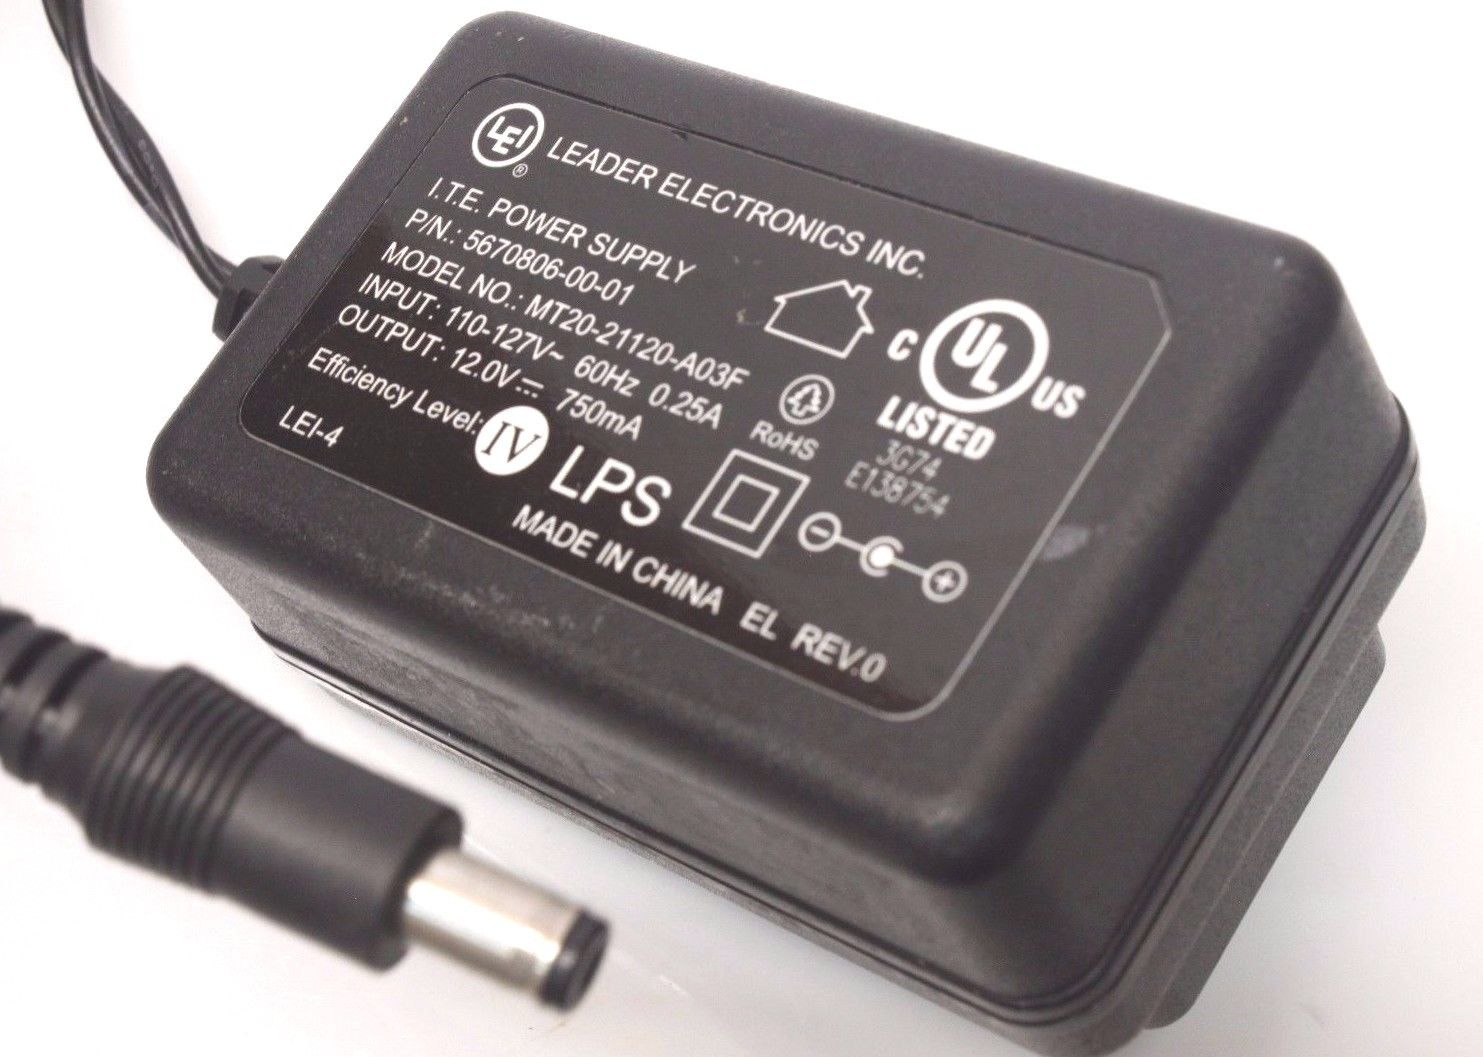 Brand new LEI MT20-21120-A03F 12V 750mA AC DC Power Supply Adapter Charger Specification: Brand:L